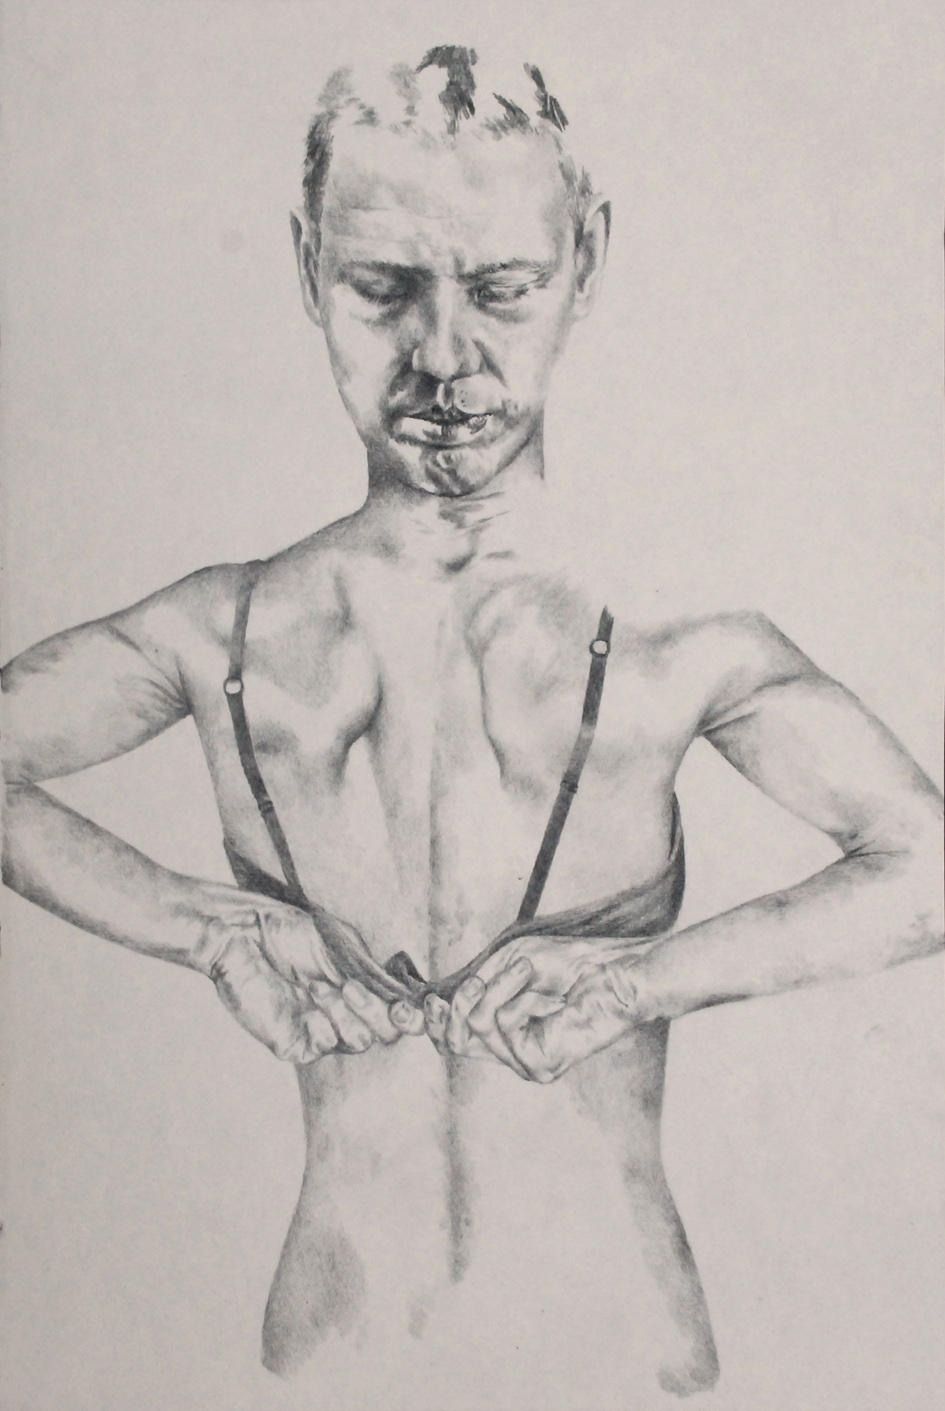 The Day I Became A Woman (Where were you), pencil on paper, 30 x 42 cm, 2014